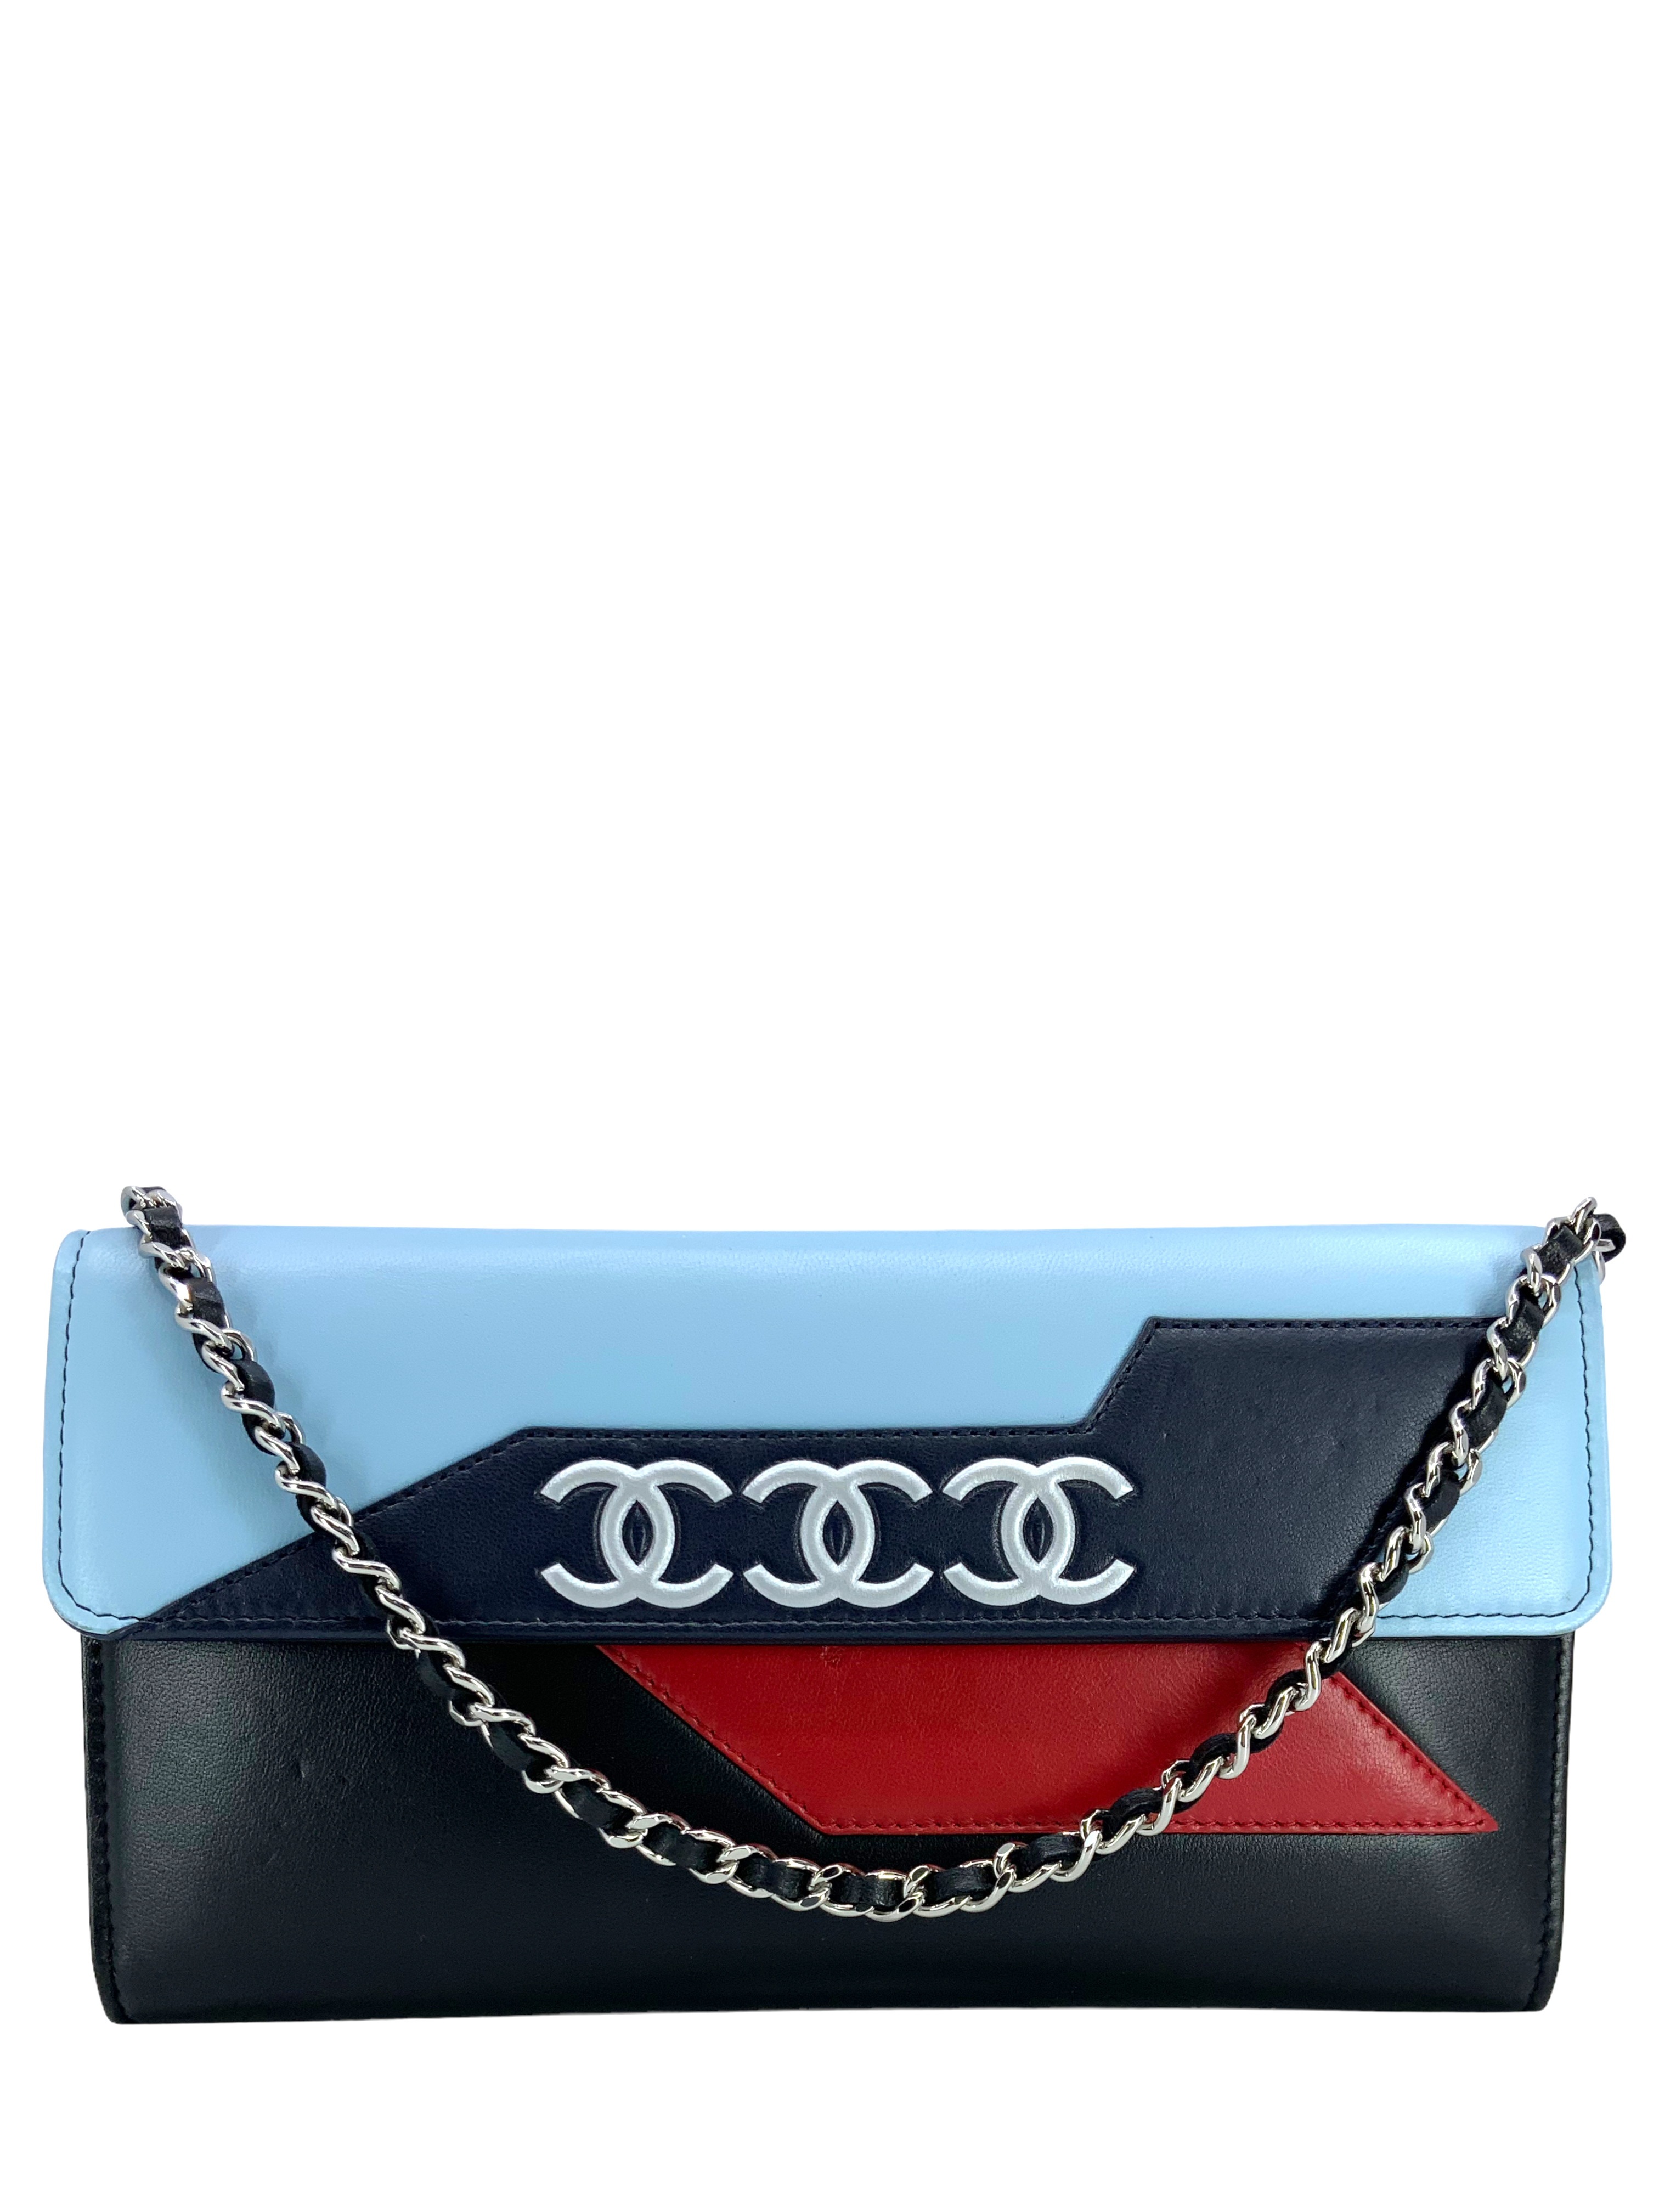 Chanel Sky Blue Quilted Leather Timeless WOC Clutch Bag Chanel